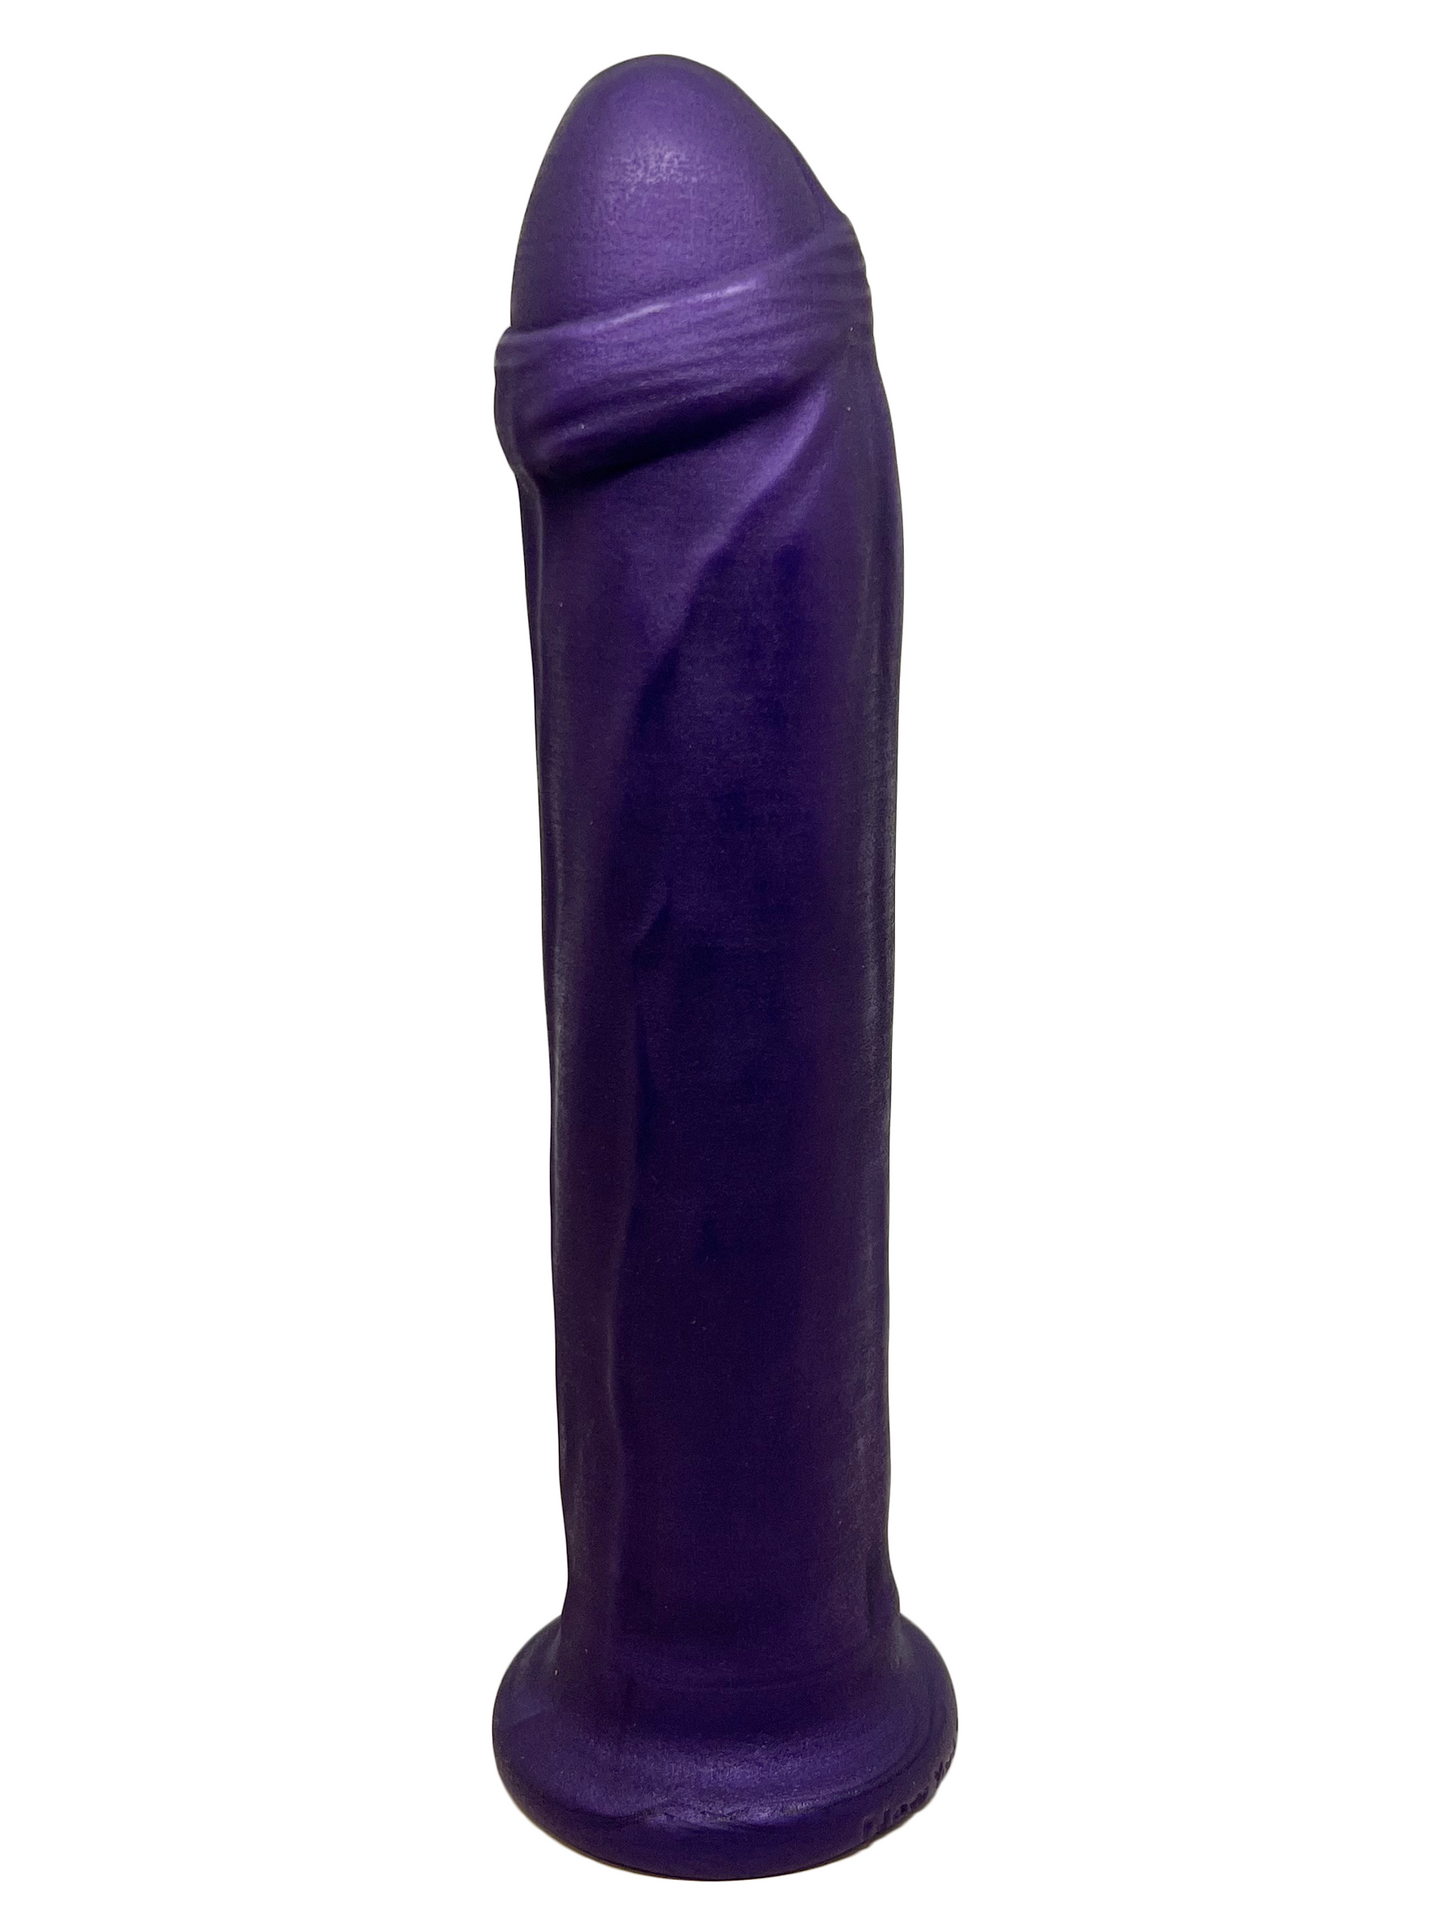 NYTC Leroy Silicone Dildo in Purple